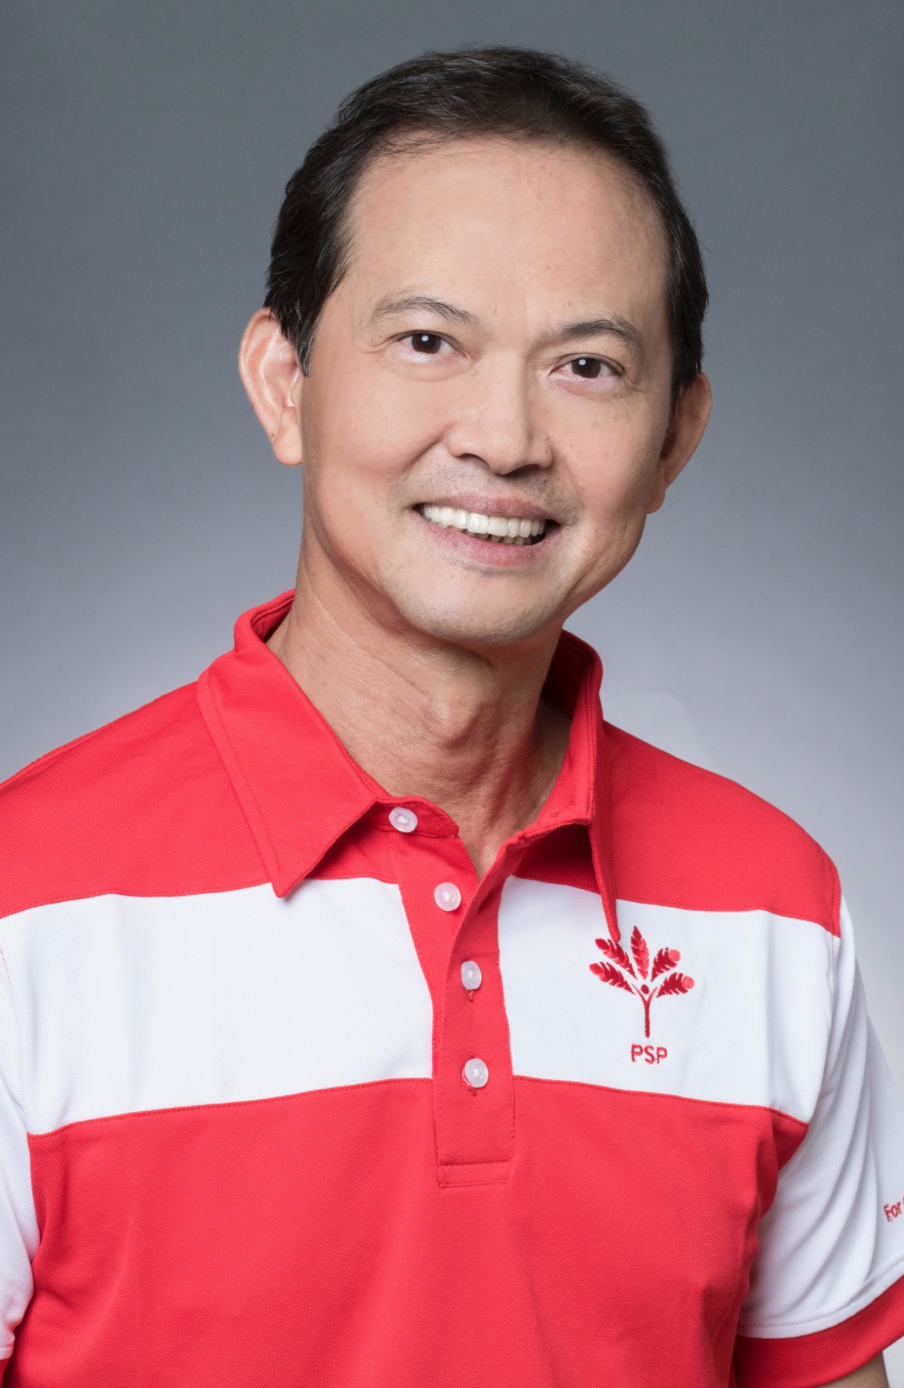 PSP’s Leong Mun Wai calls for immediate change to “restore the balance of interests between the Singaporeans and the foreigners in our country”